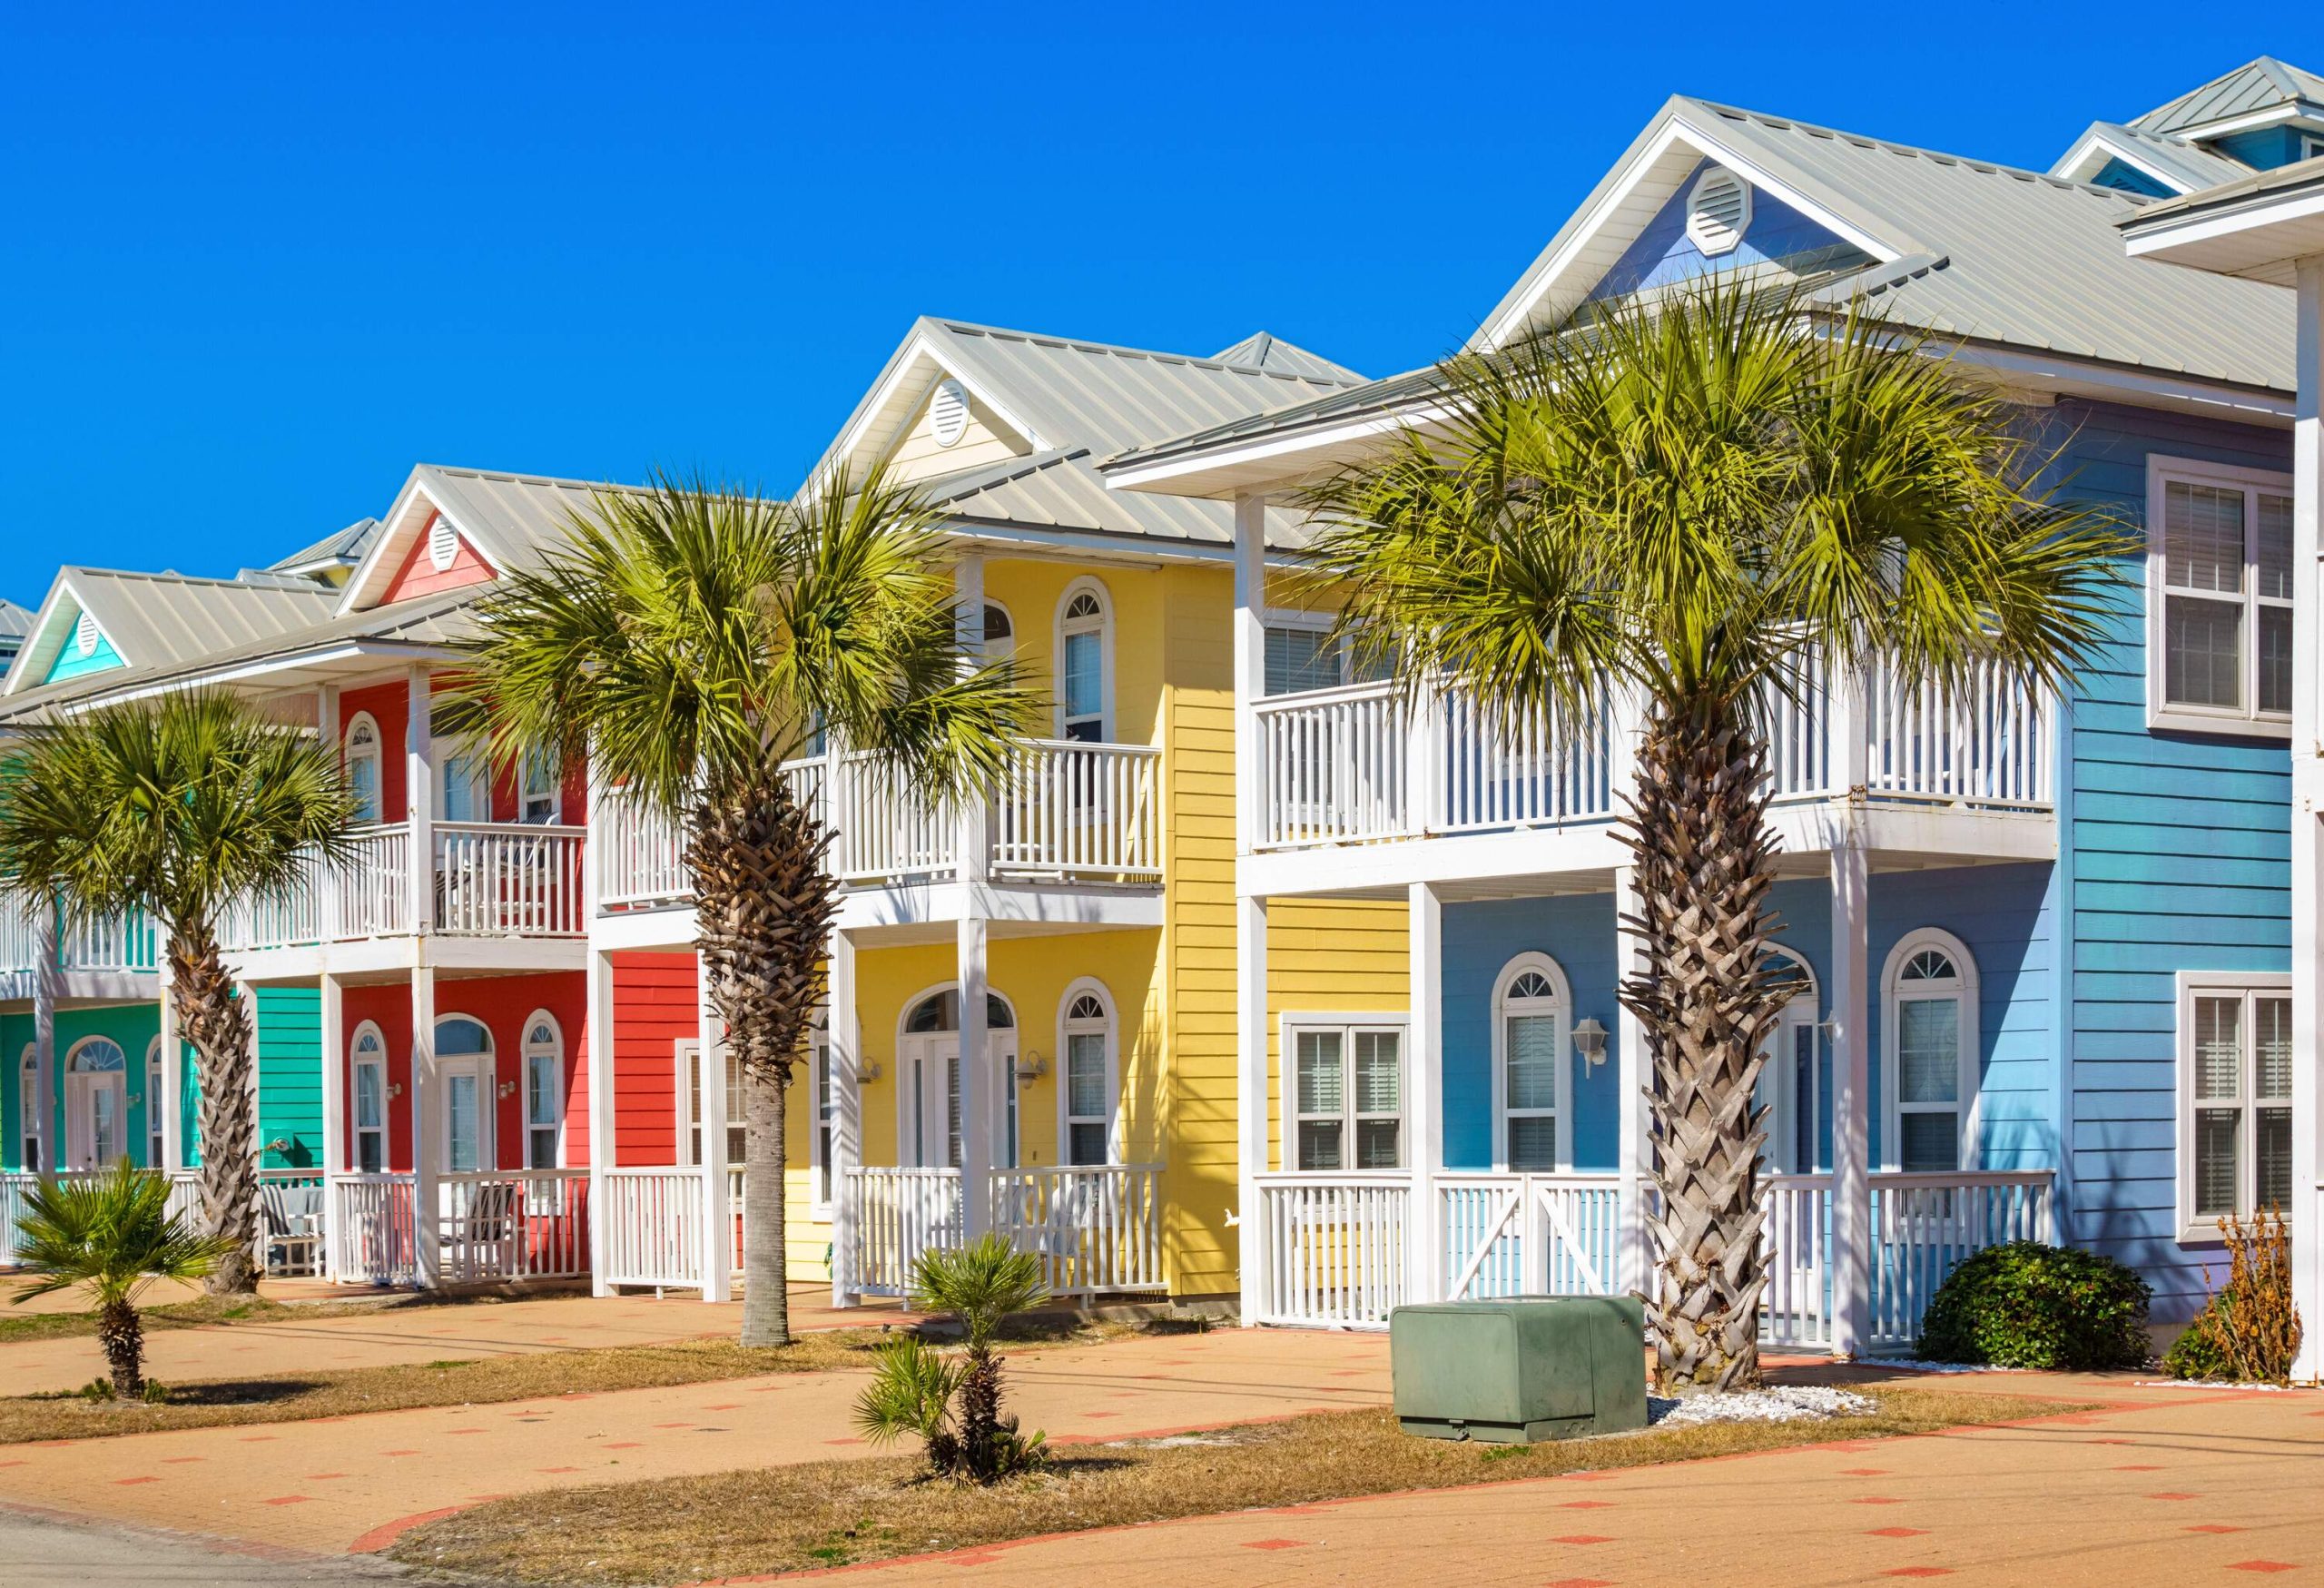 A row of colourful adjacent wooden homes with palm trees.